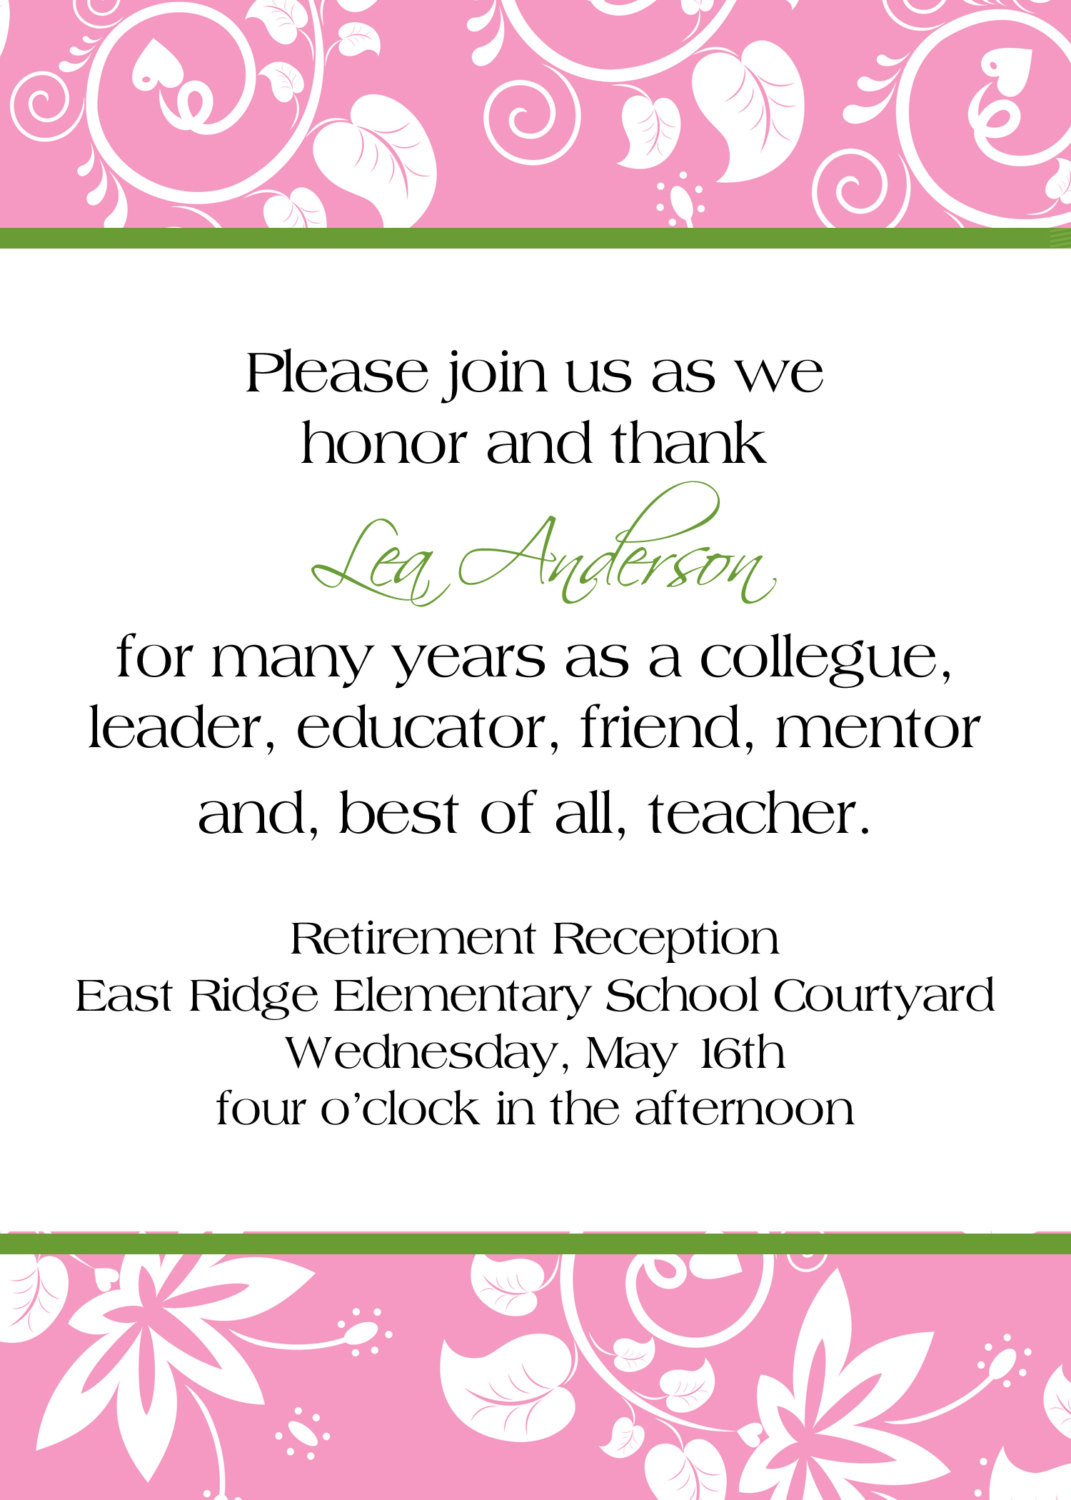 Retirement Party Invitation Wording Ideas
 PARTY INVITATION QUOTES FOR TEACHERS image quotes at